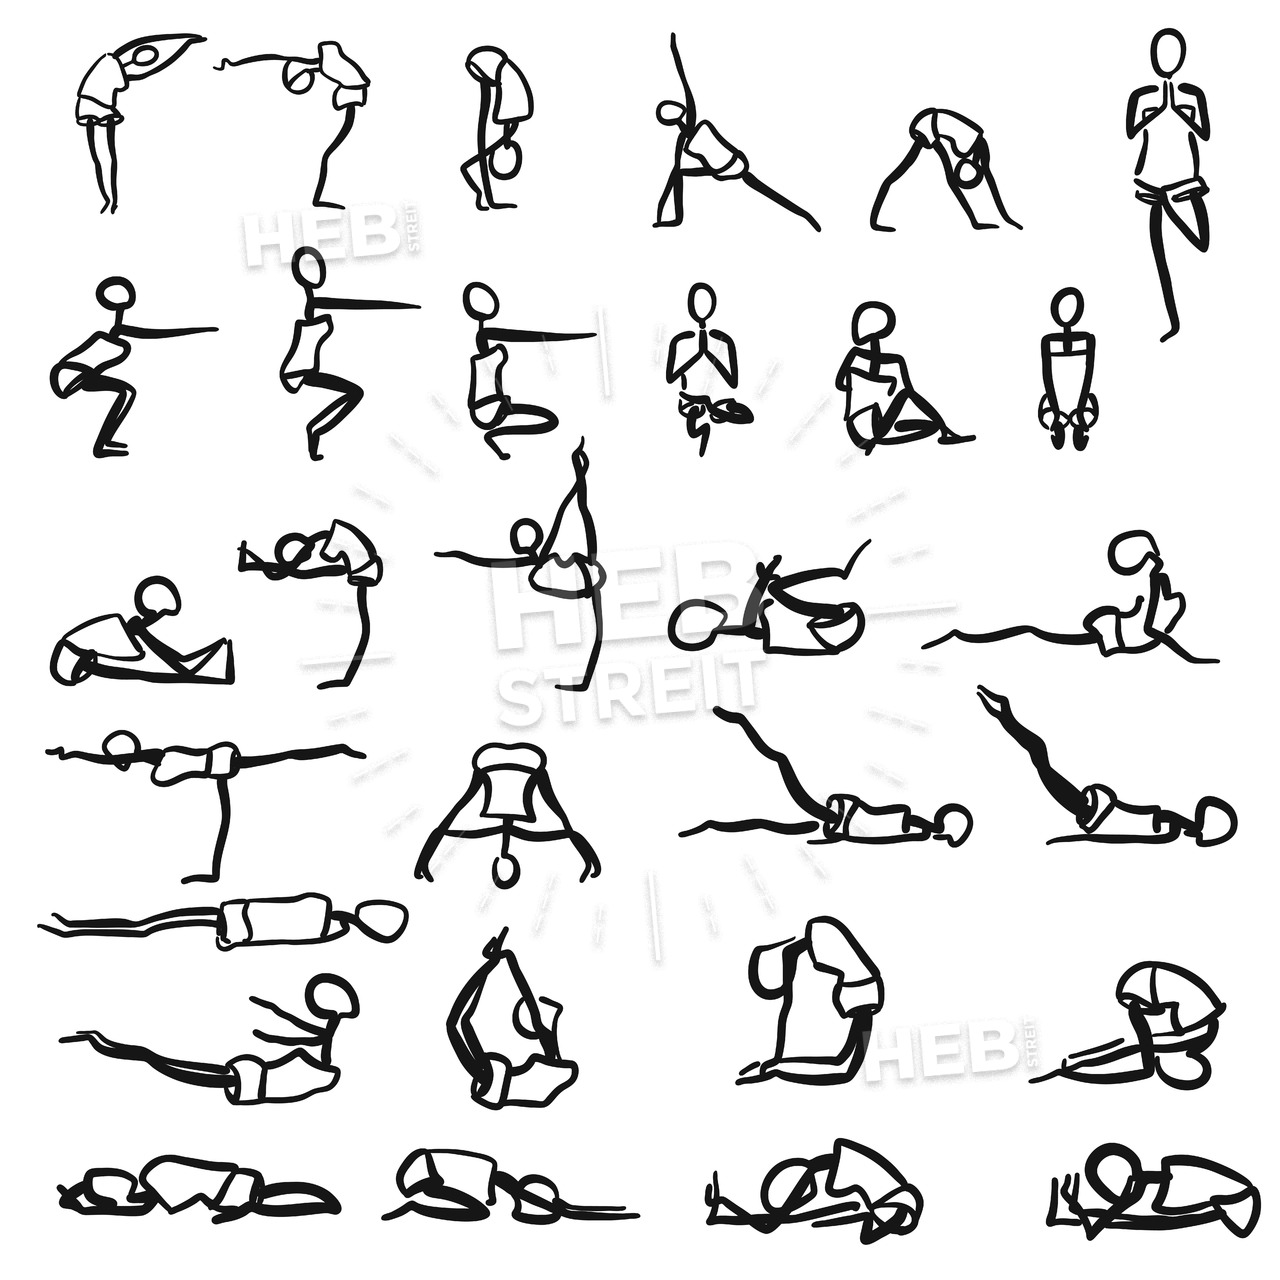 Get Drawing Yoga Poses Art Pictures